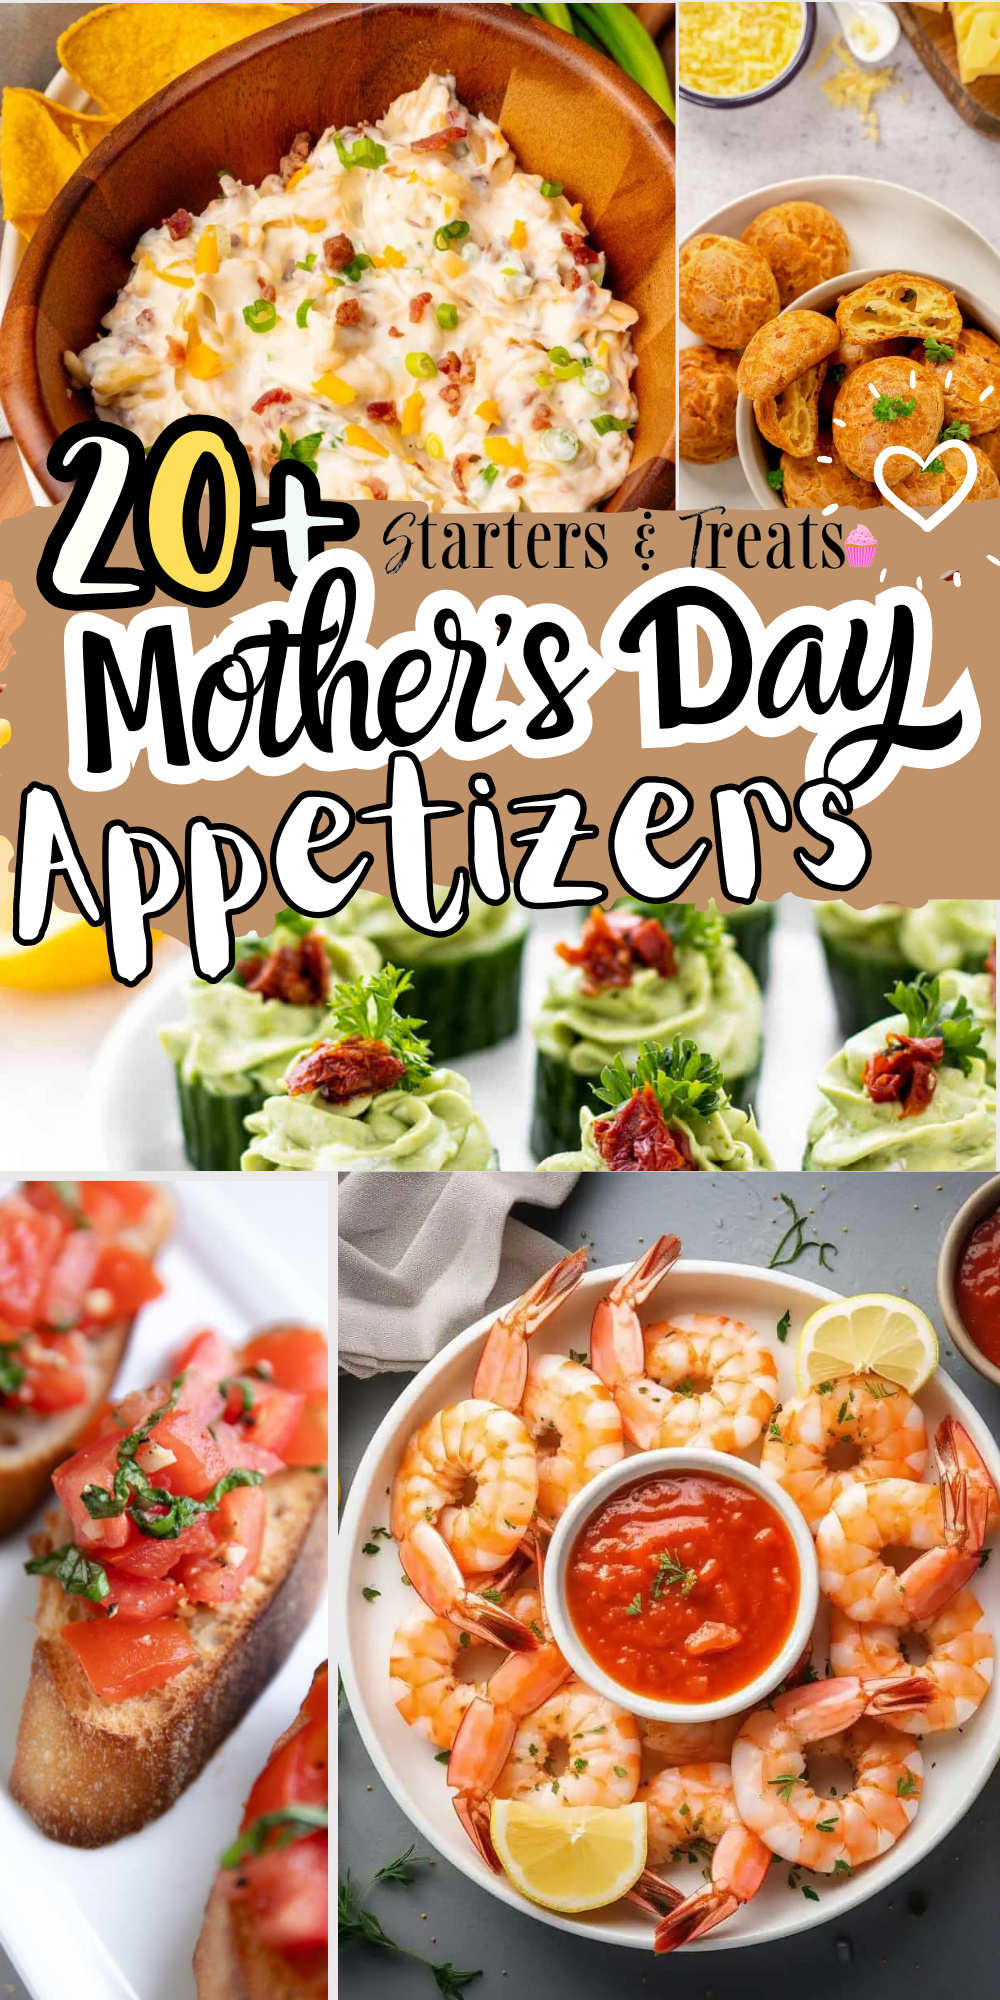 20+ mother's day appetizers